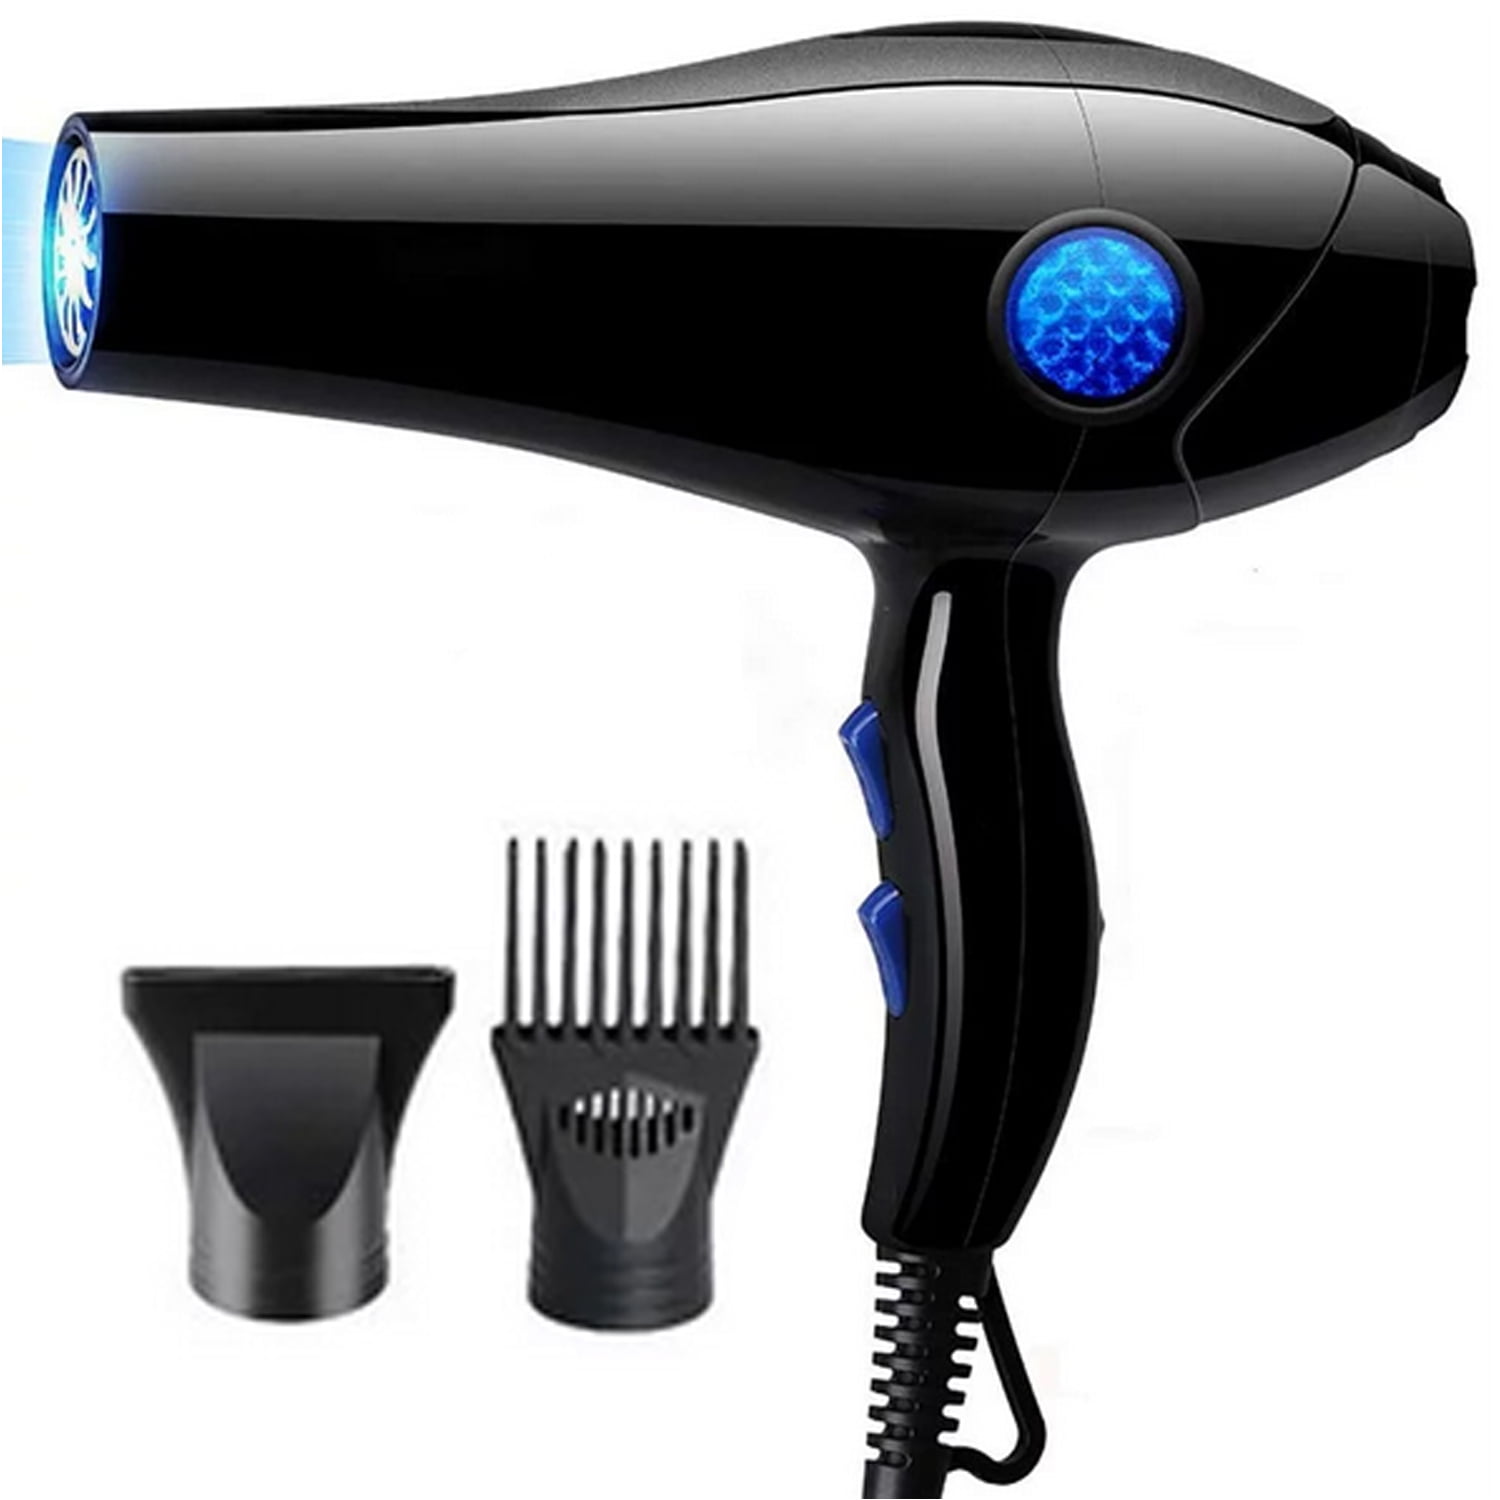 Professional 5000W Hair Dryer for Men and Women